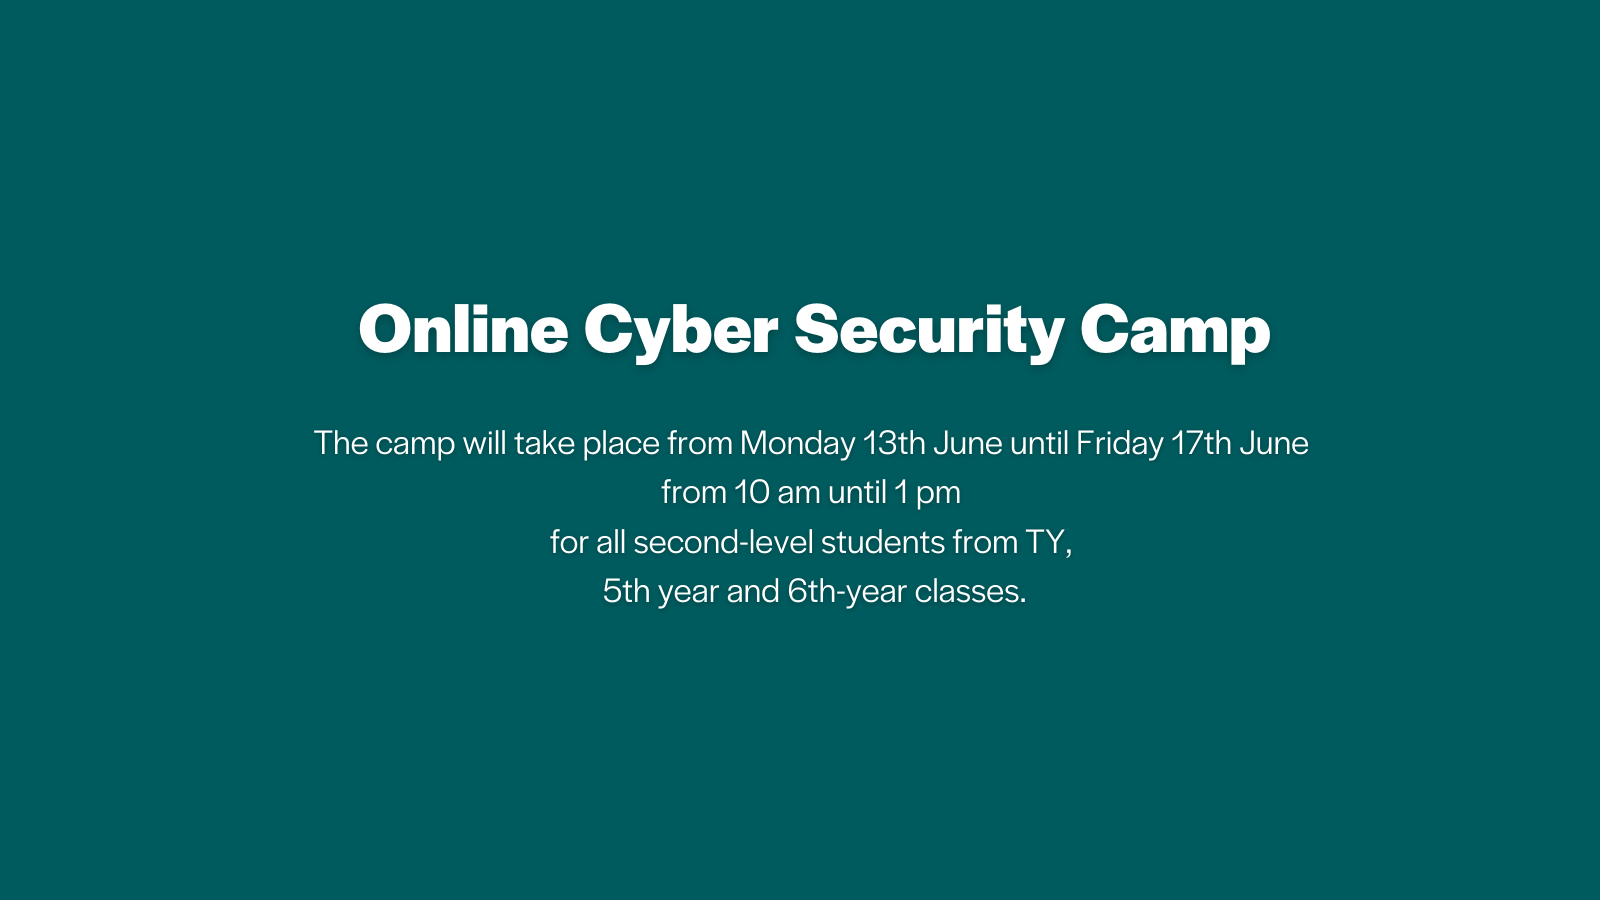 Online Cyber Security Camp